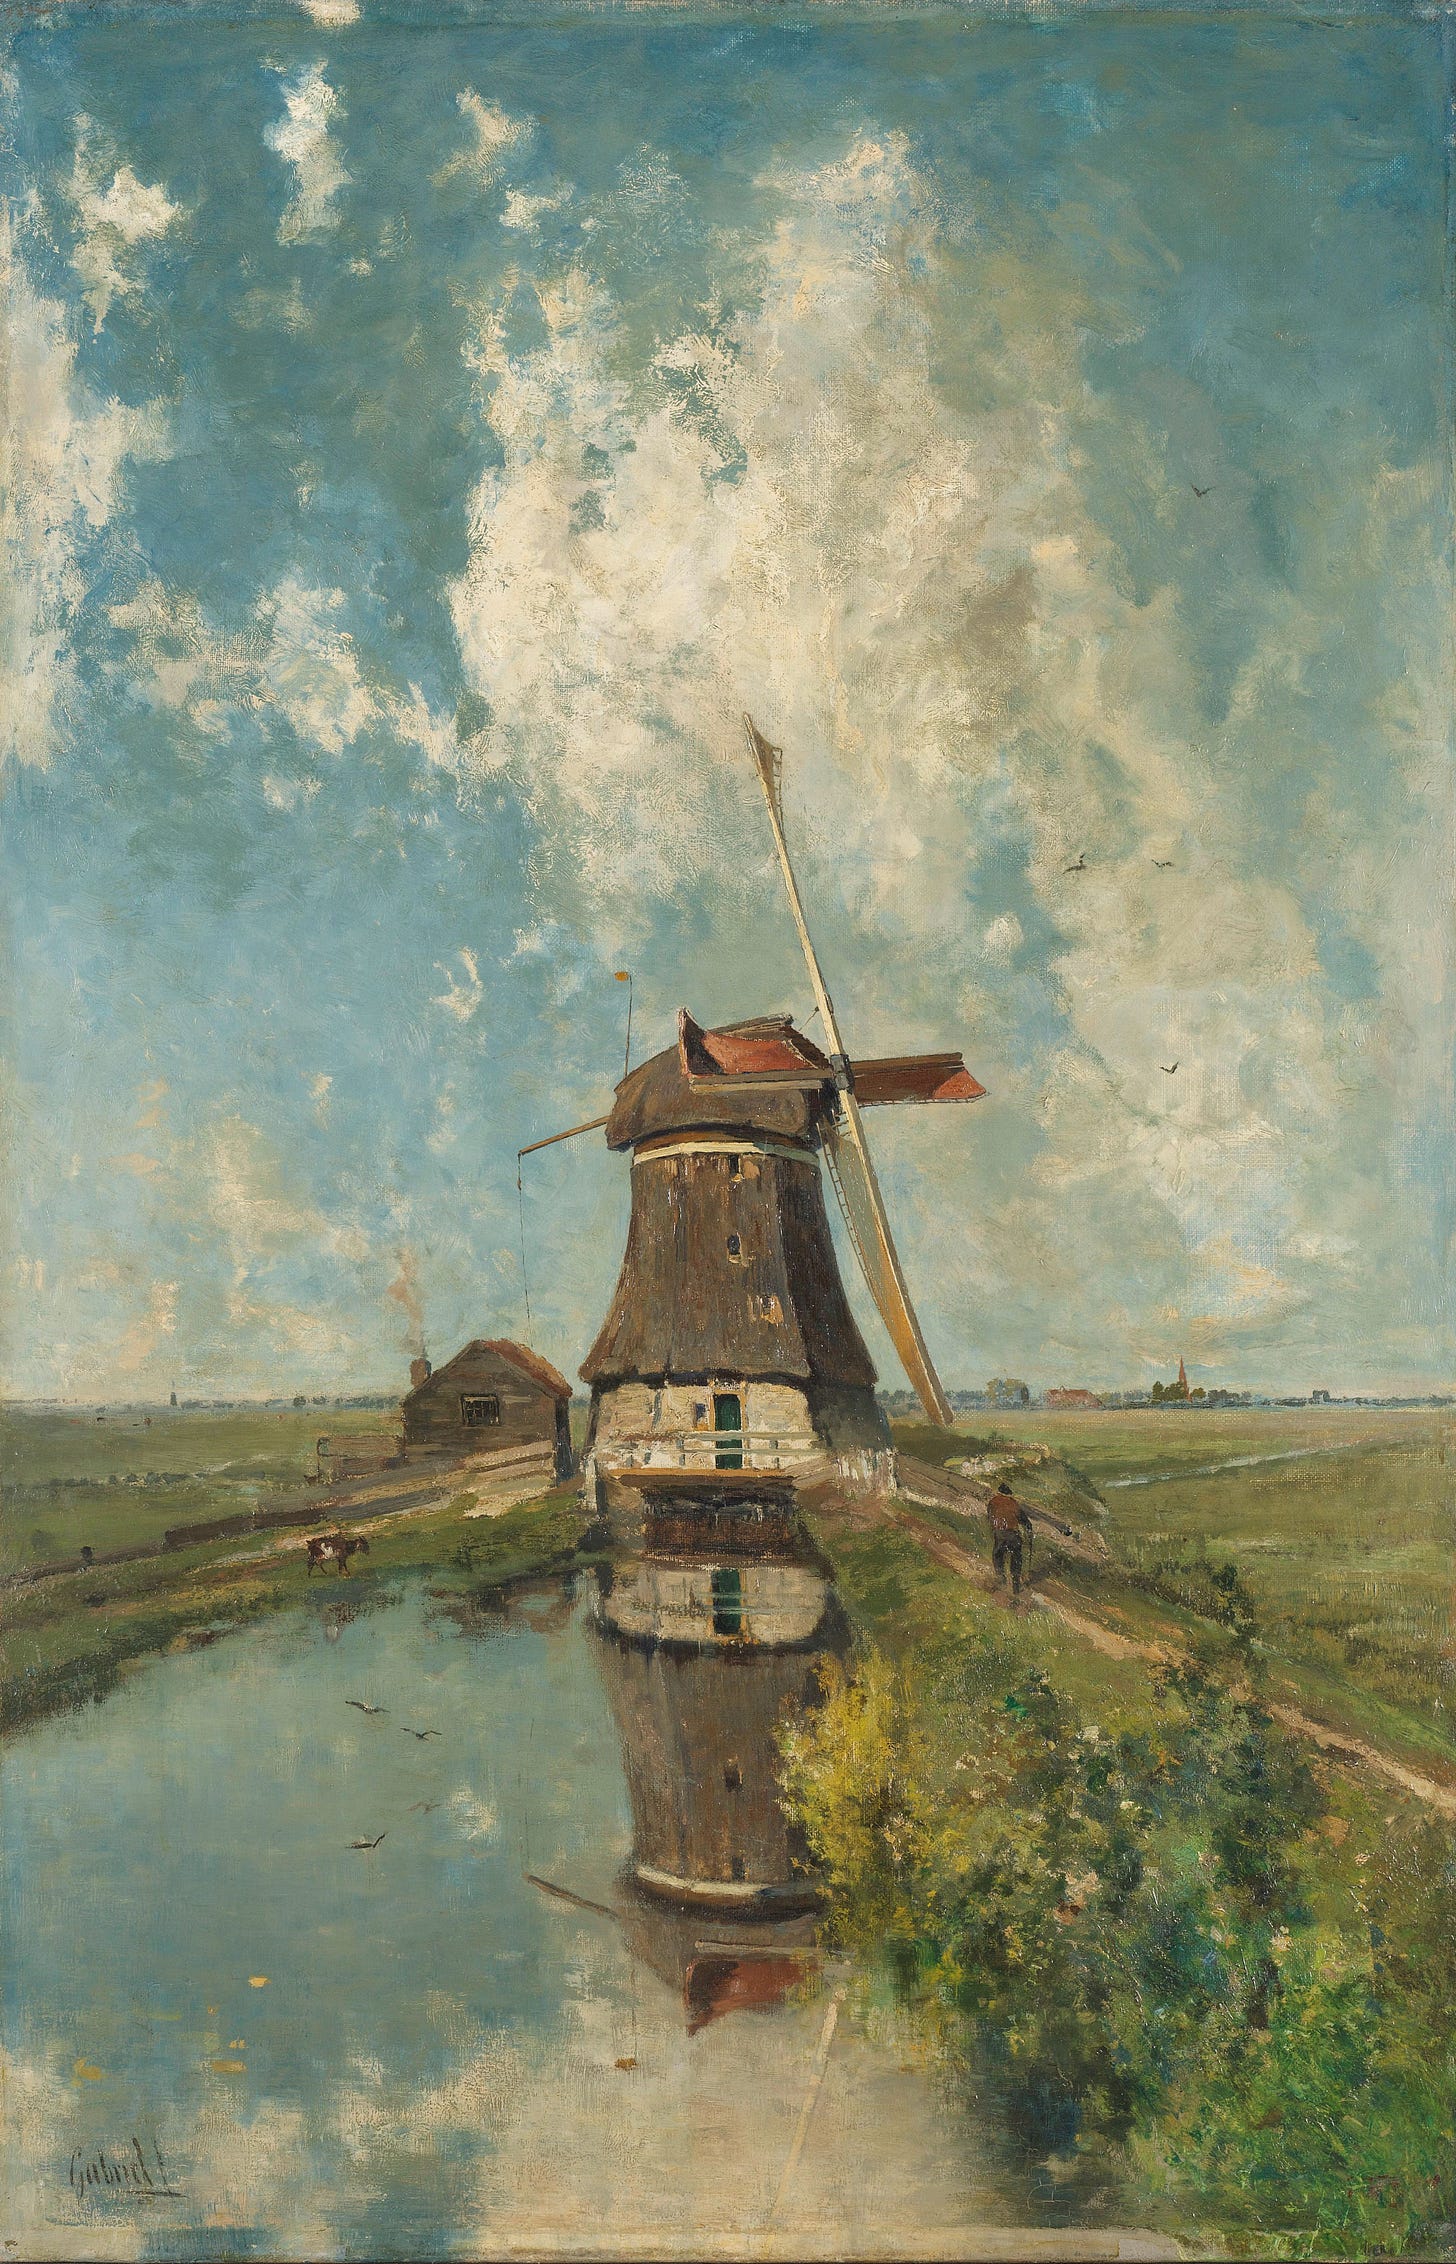 Oil painting on canvas. height 102 cm × width 66 cm × depth 14 cm Depiction of a windmill on a polder canal in the summer. The mill is reflected in the water. On the right a man walks on the road to the mill, on the left a house.